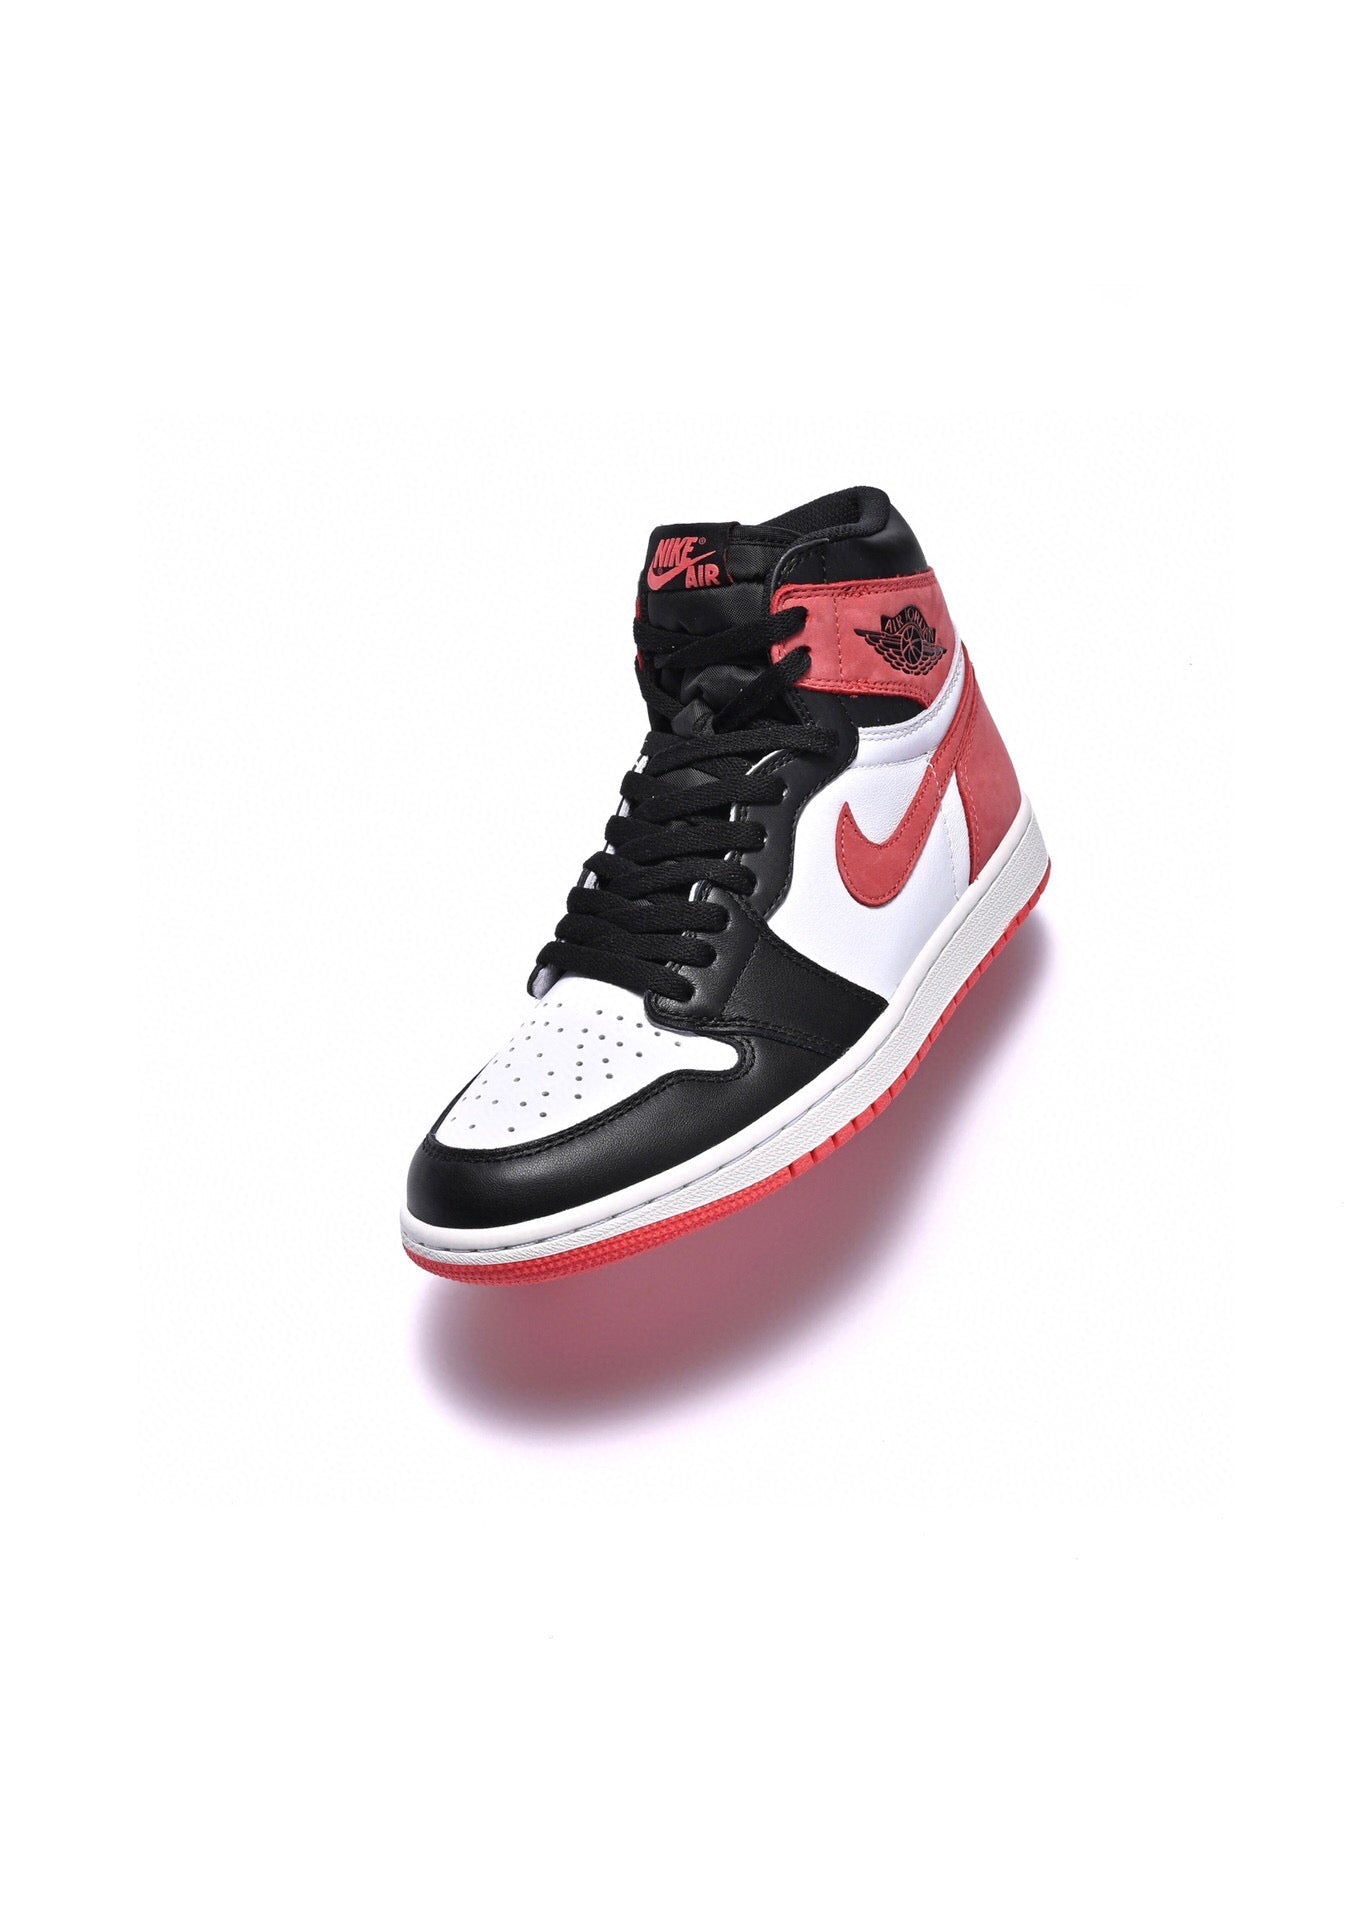 VO - AJ1 High Six Crowns Black and Red